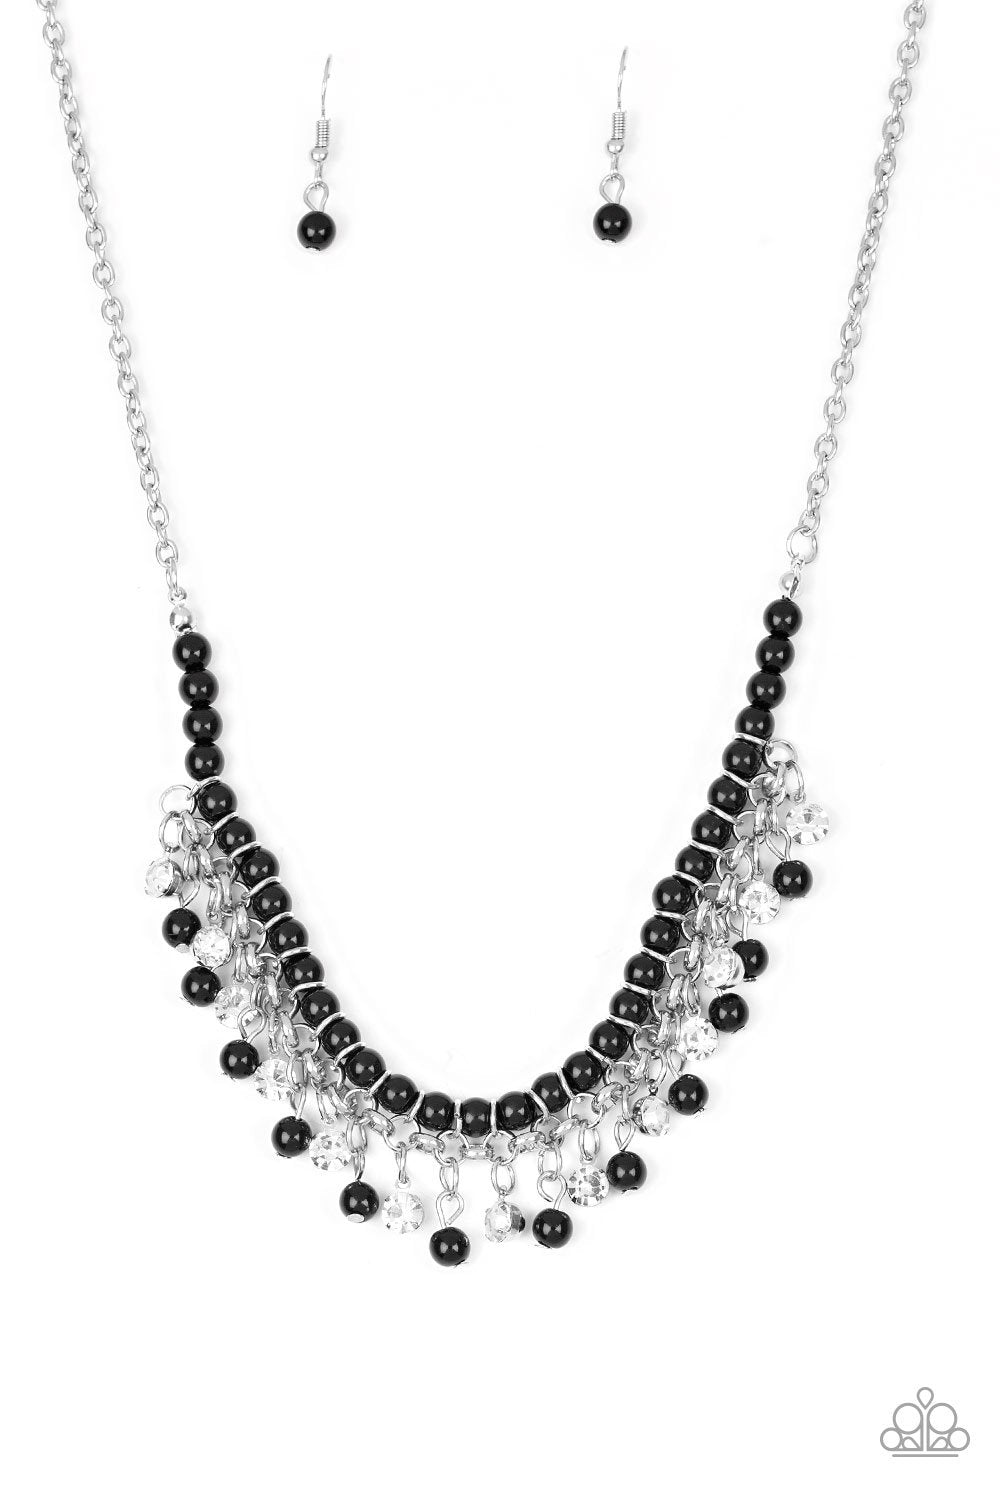 A of - Necklace | Paparazzi Accessories | $5.00